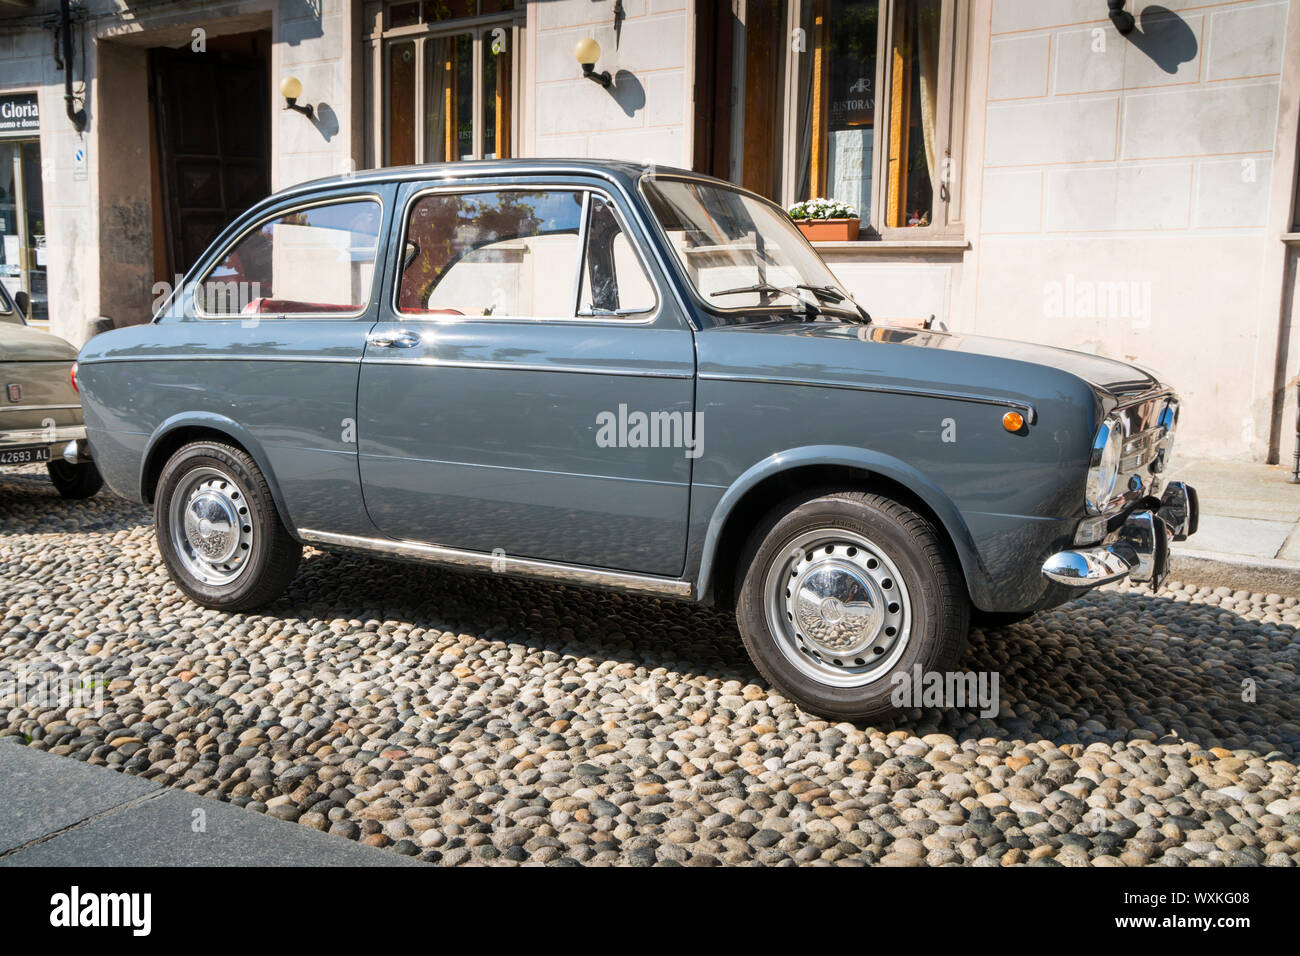 Varallo Sesia, Italy - June 02, 2019: Classic car, Italian old Fiat 850 during a vintage cars rally Stock Photo